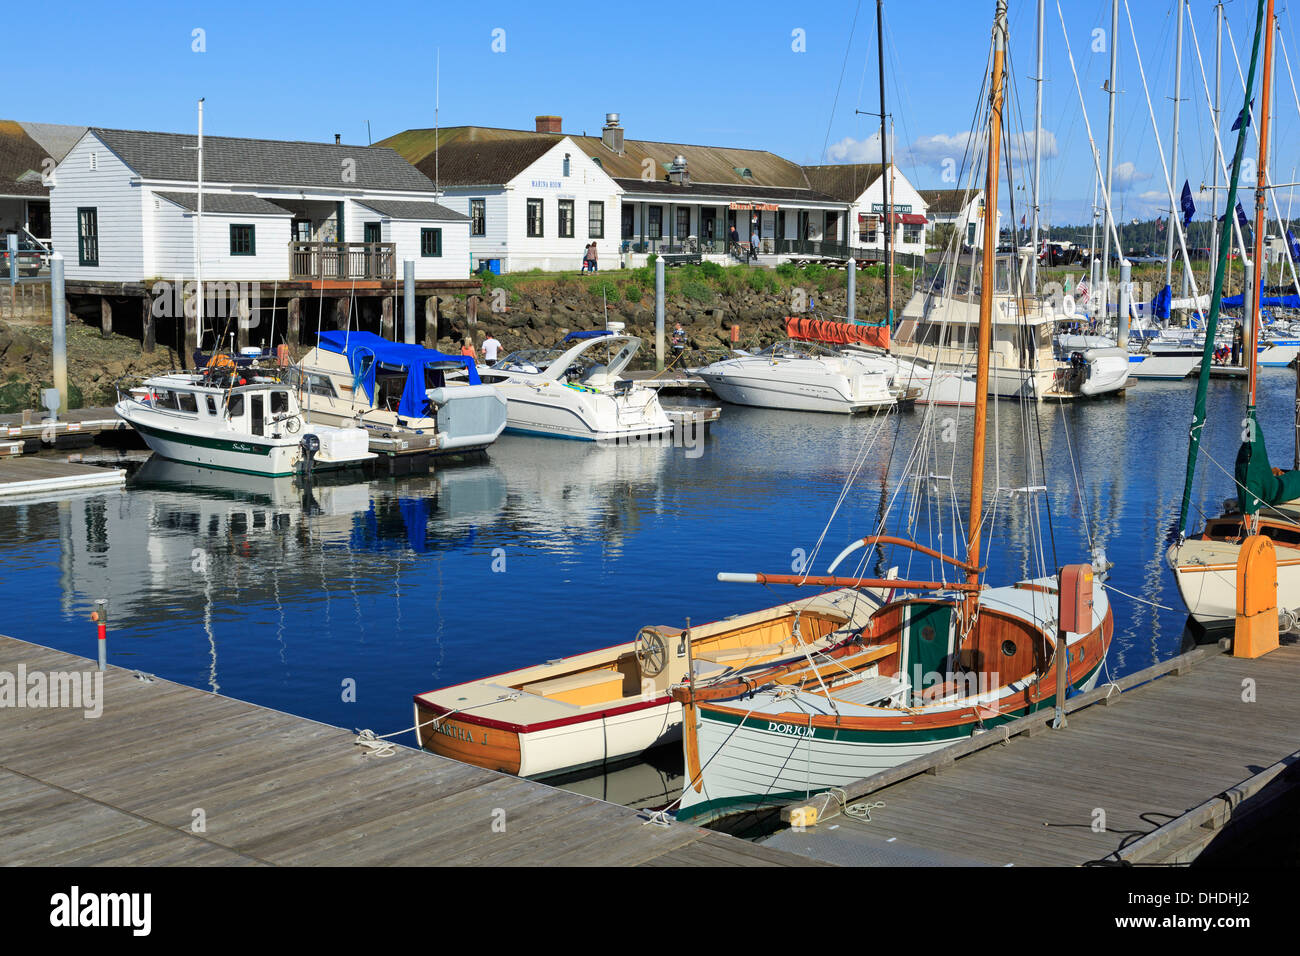 Marina in Port Townsend, Puget Sound, Washington State, United States of America, North America Stock Photo